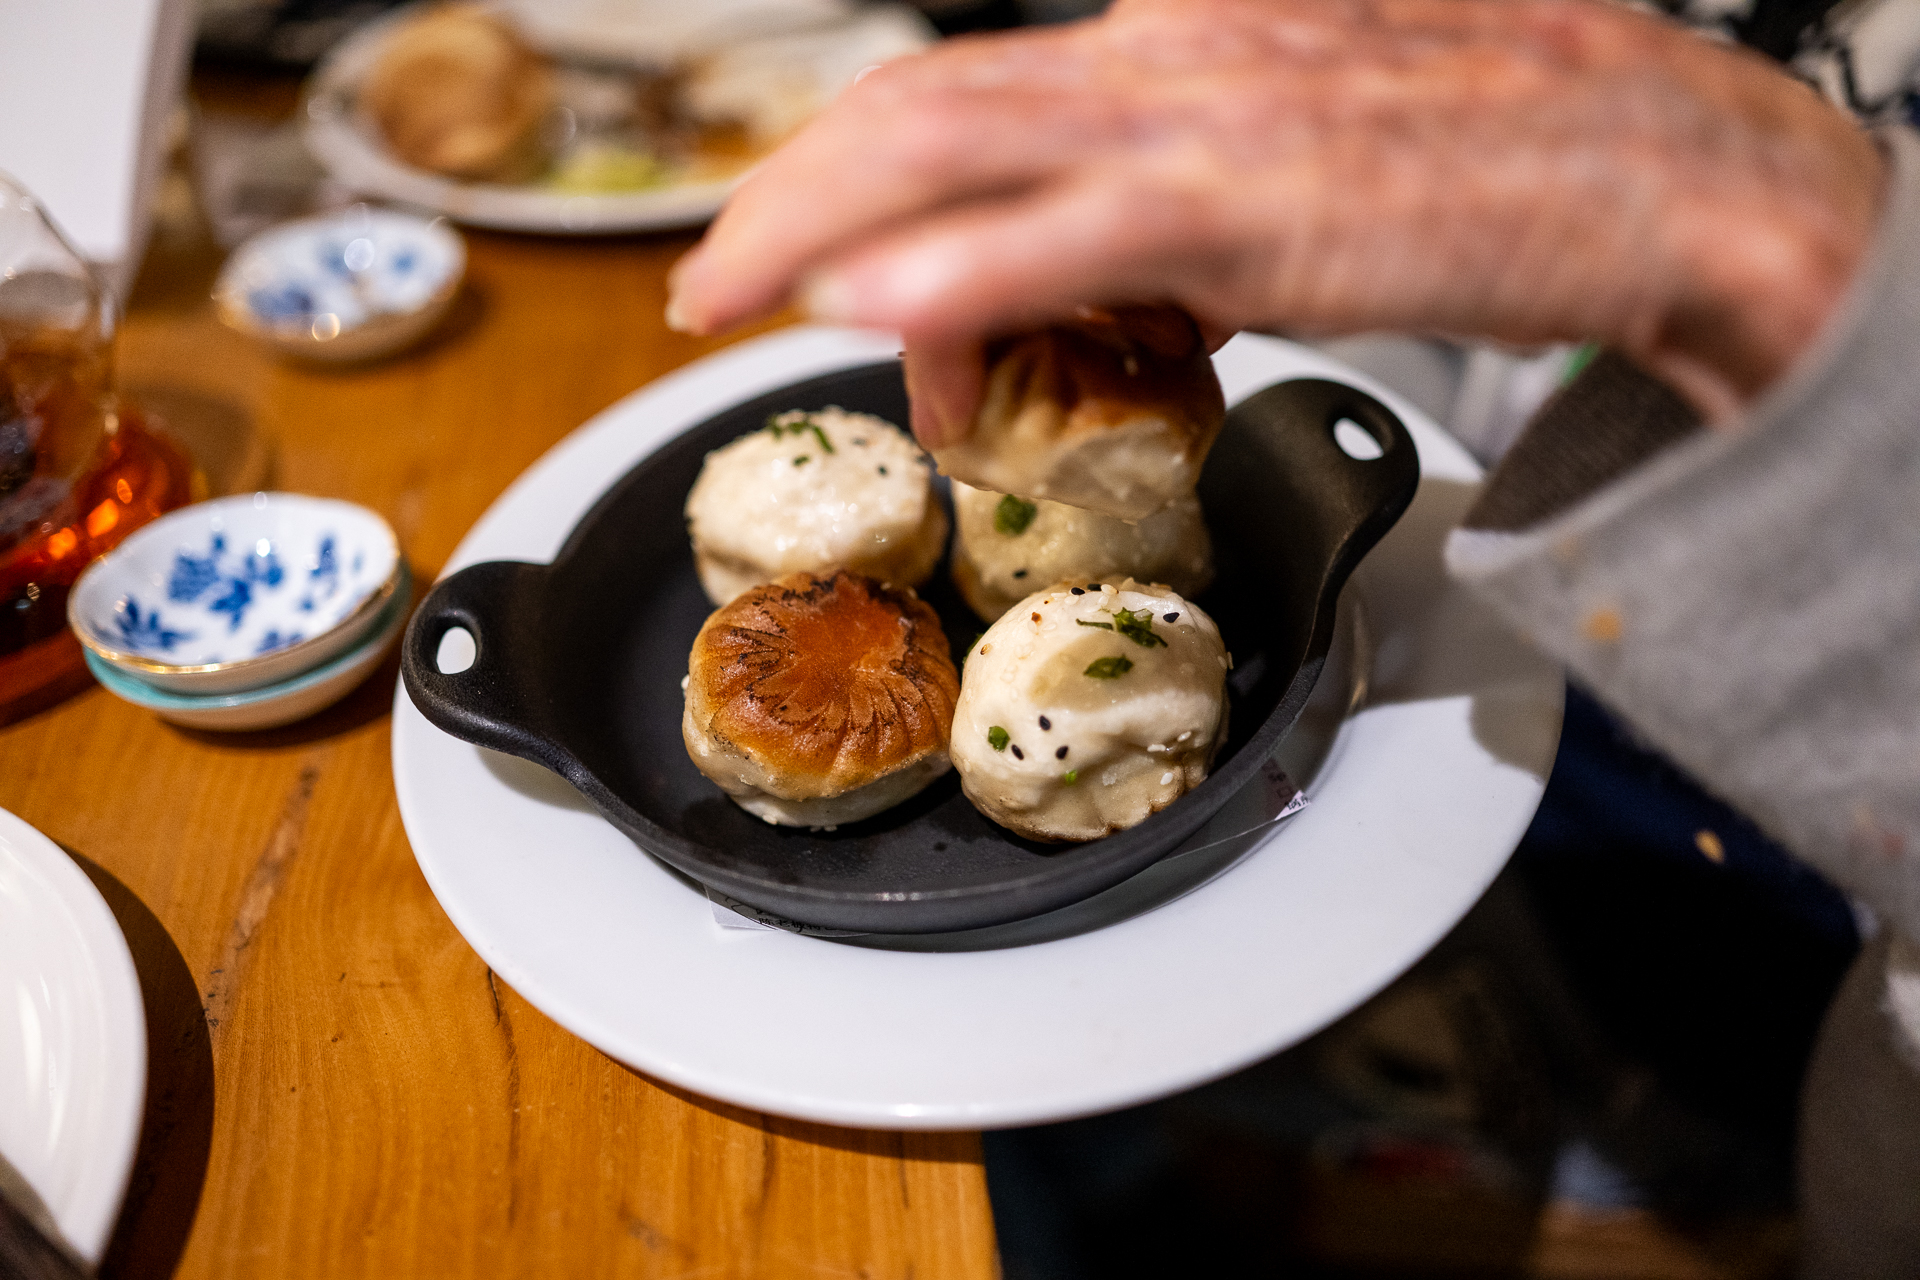 A hand reaches for one of five dumplings on a dish.